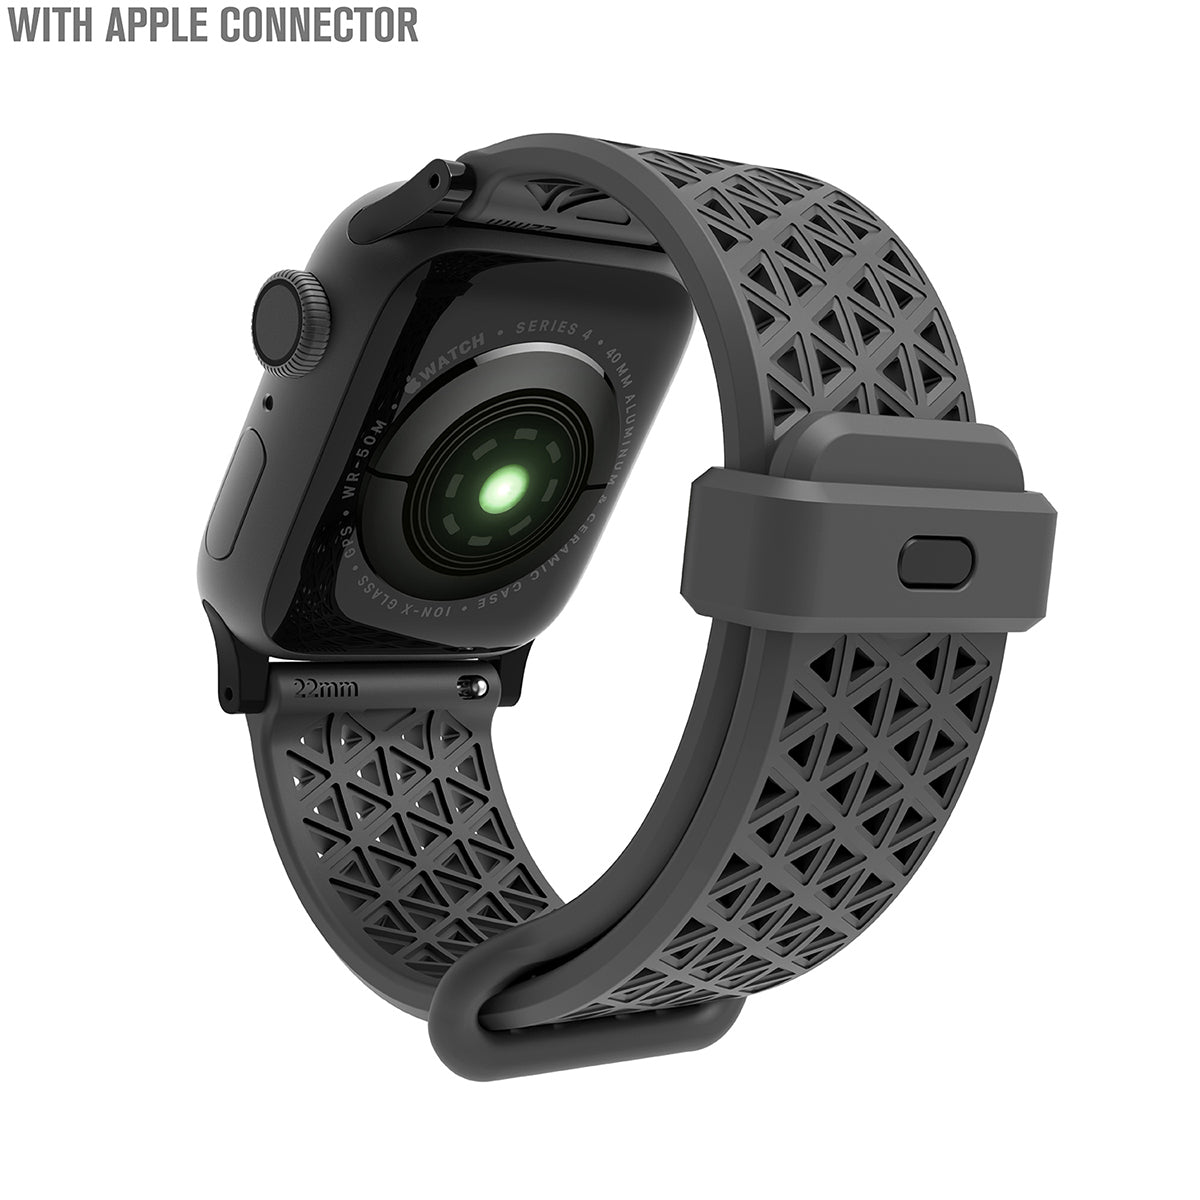 catalyst apple watch series 9 8 7 6 5 4 se gen 2 1 38 40 41mm sports band with apple connector apple watch back view with sports band space gray text reads with apple connector